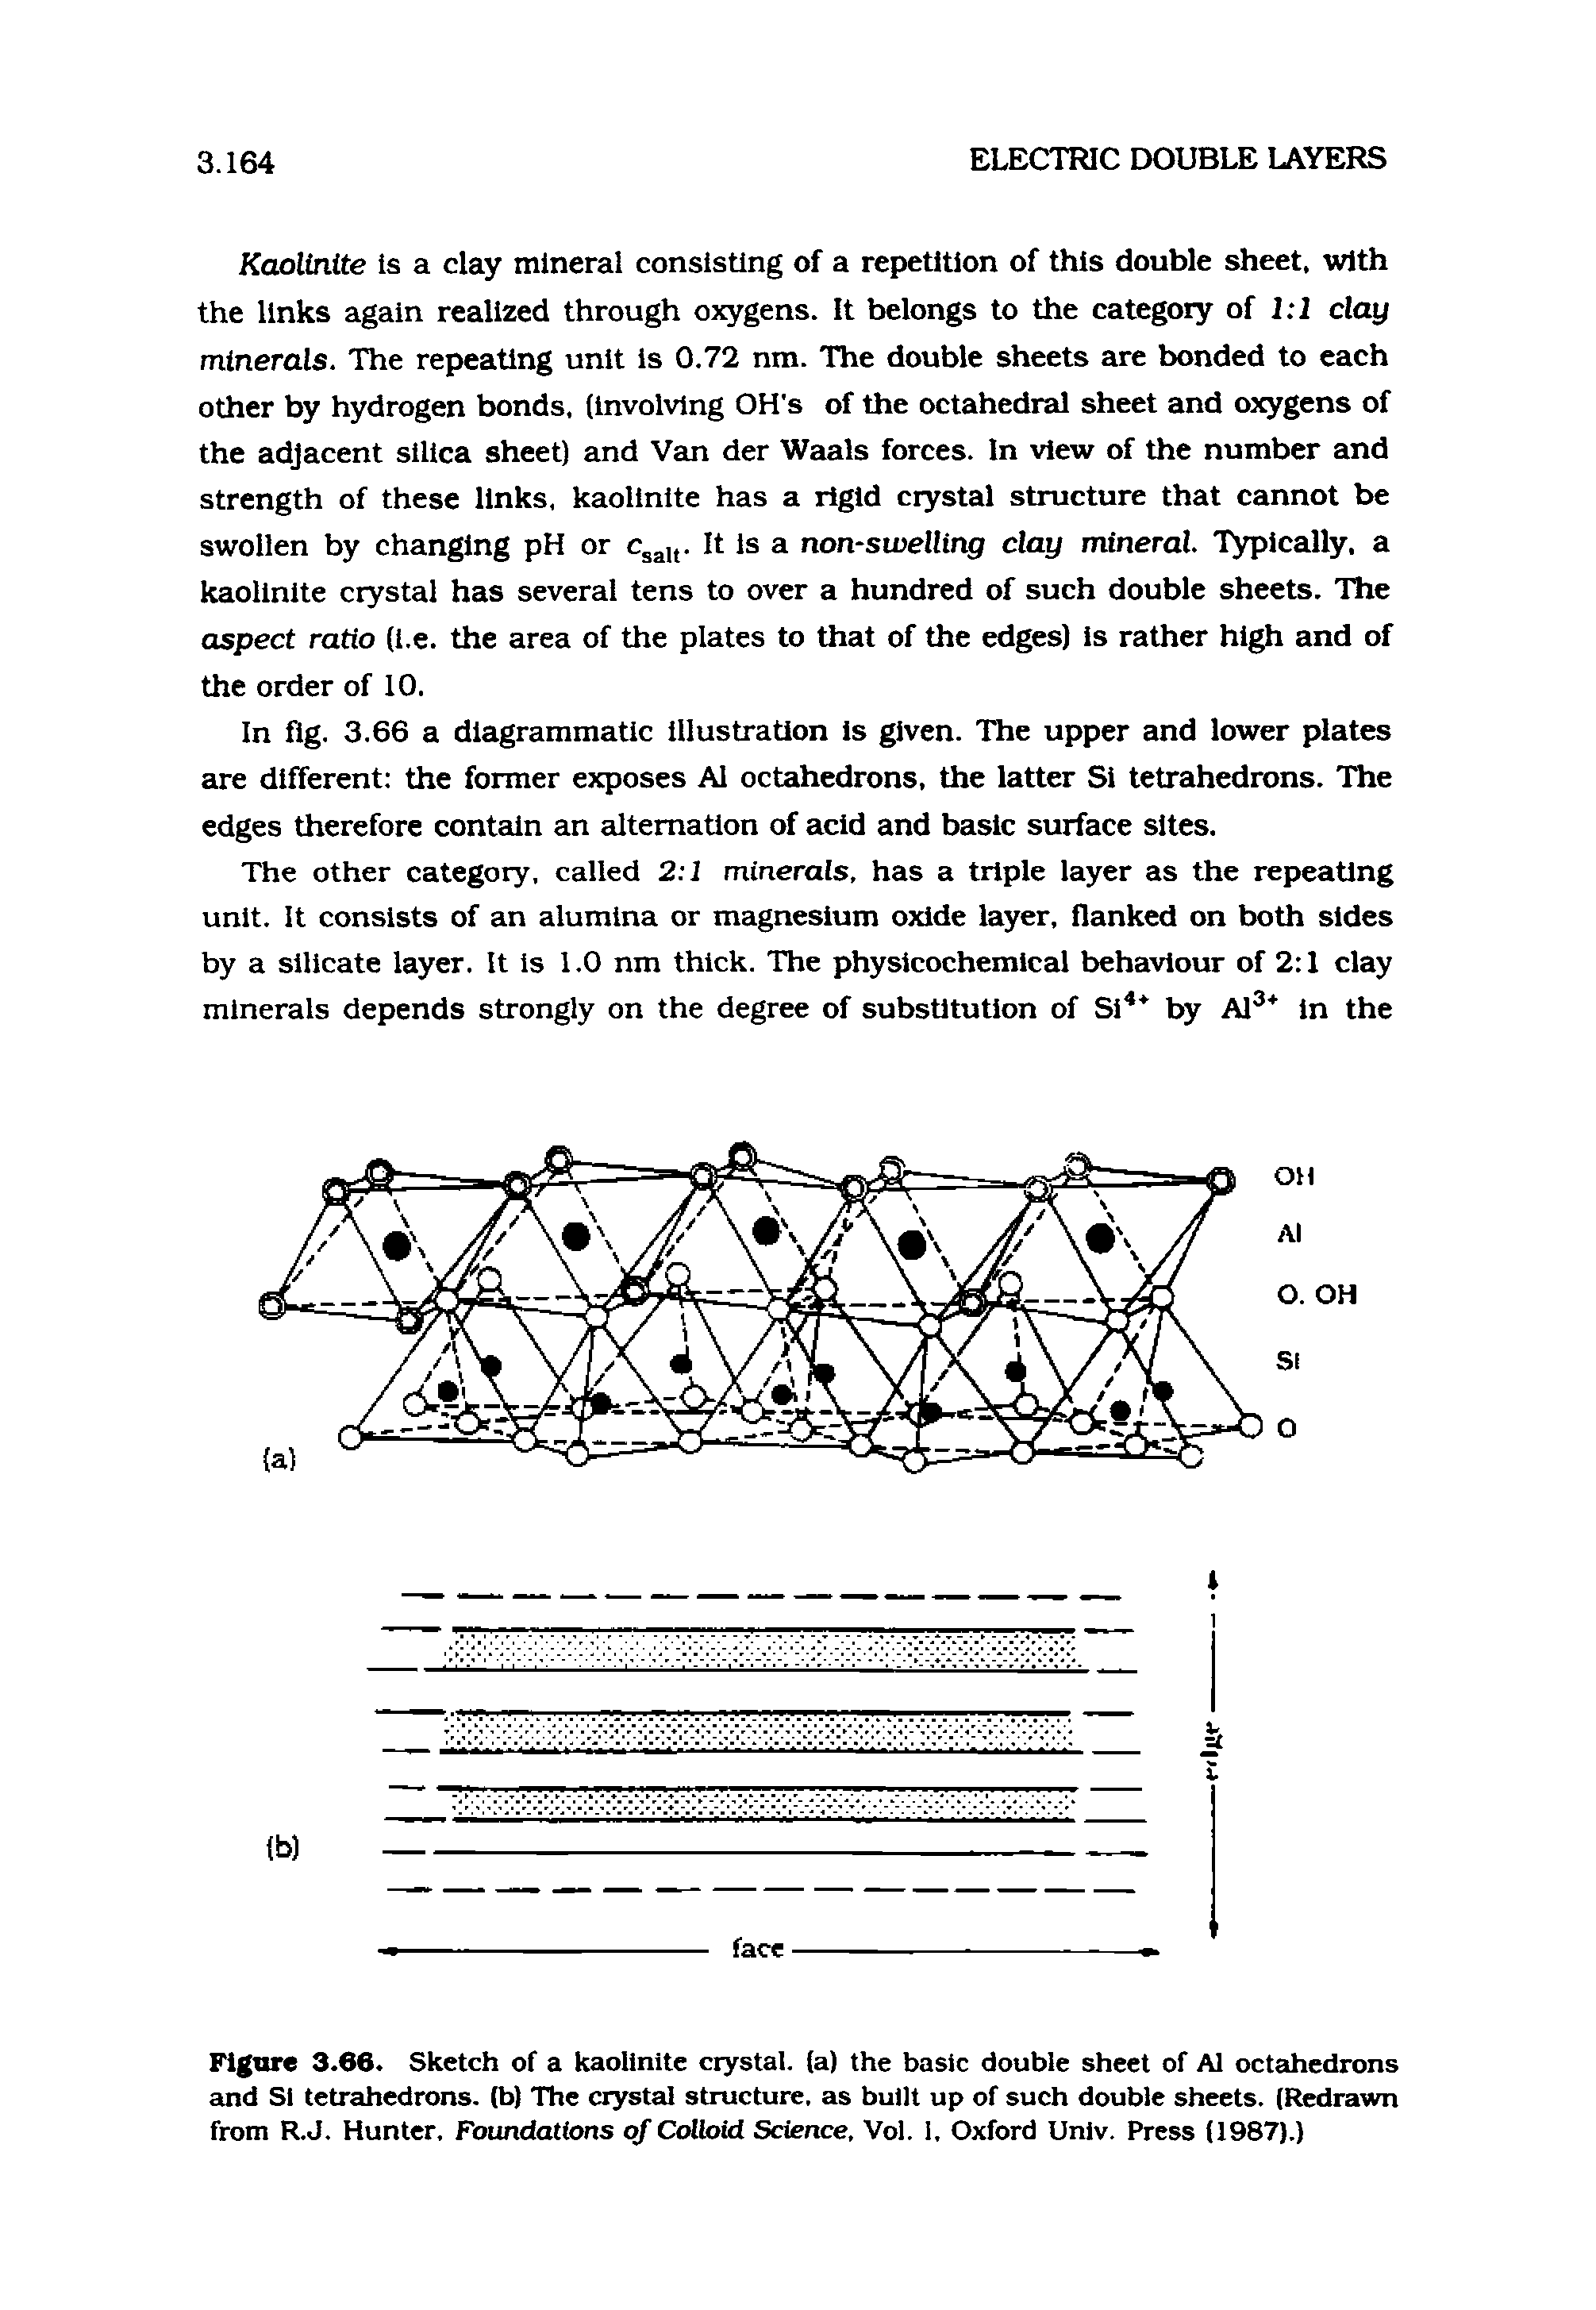 Figure 3.66. Sketch of a kaolinlte crystal, (a) the basic double sheet of A1 octaihedrons and SI tetrahedrons, (b) The crystal structure, as built up of such double sheets. (Redrawn from R.J. Hunter, Foundations oj Colloid Science, Vol. 1, Oxford Univ. Press (1987).)...